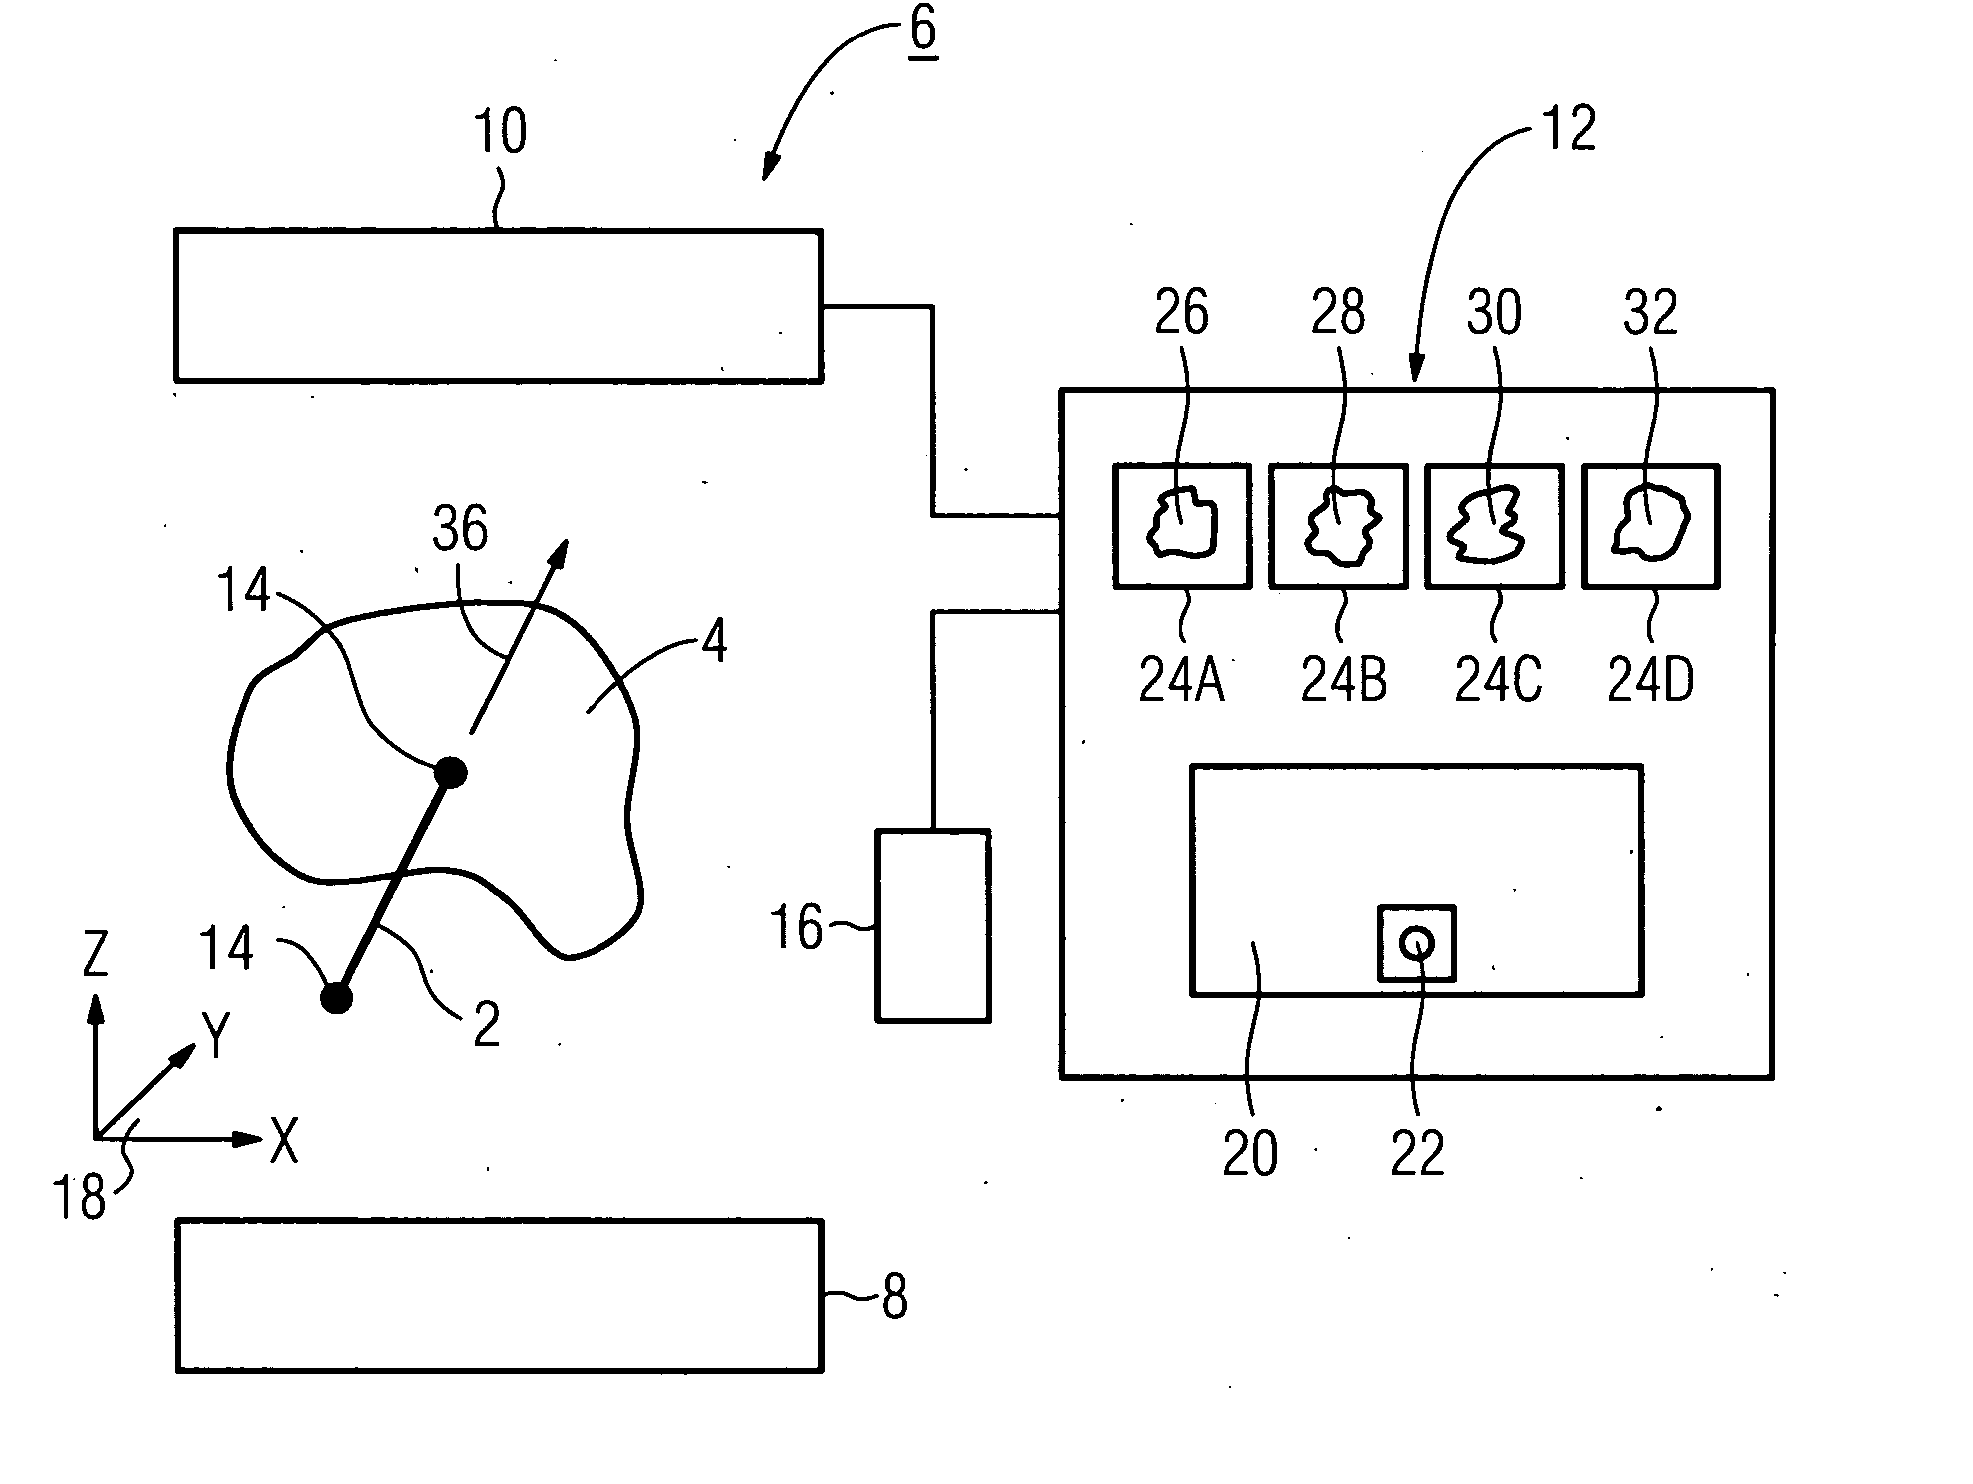 Method for displaying a medical implant in an image and a medical imaging system